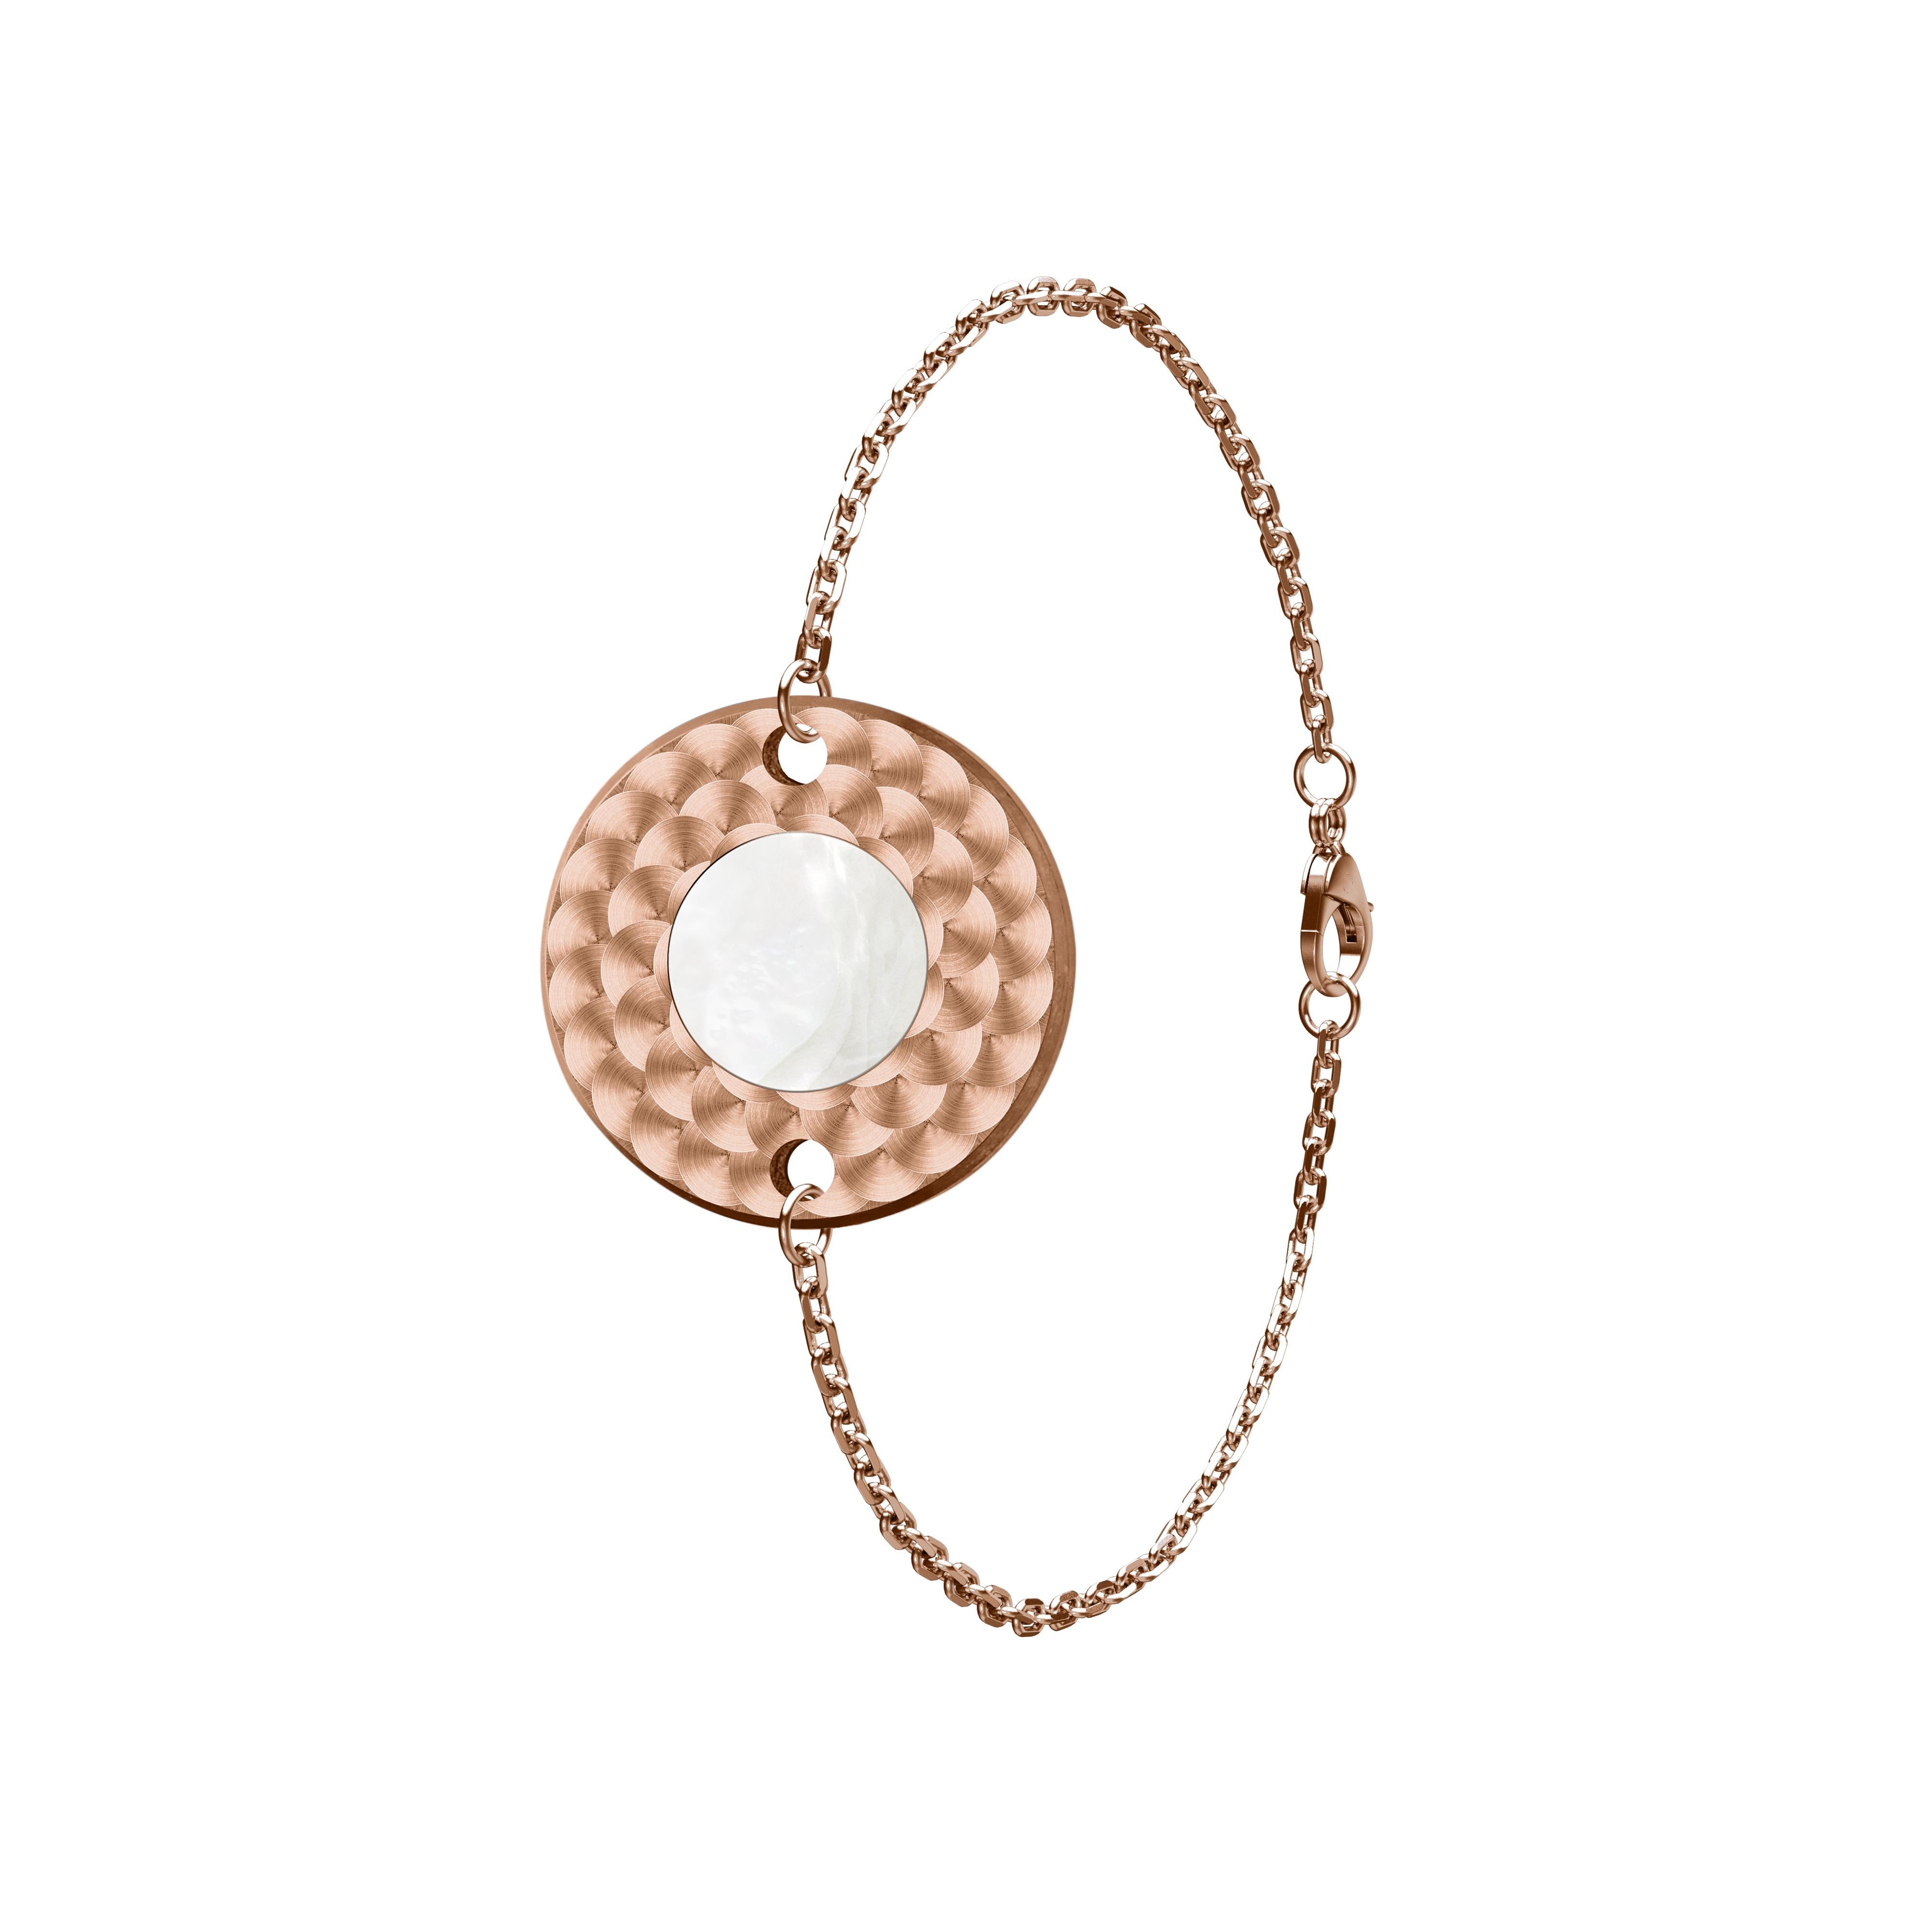 B.R.M Dolce Vita Twice (2 in 1) 18 carats rose gold reversible bracelet is an exquisite work of art. It can be worn in two ways. It comes with Tiger’s eye on one side, and adorned with mother of pearl, a symbol of serenity on the other side. 

The